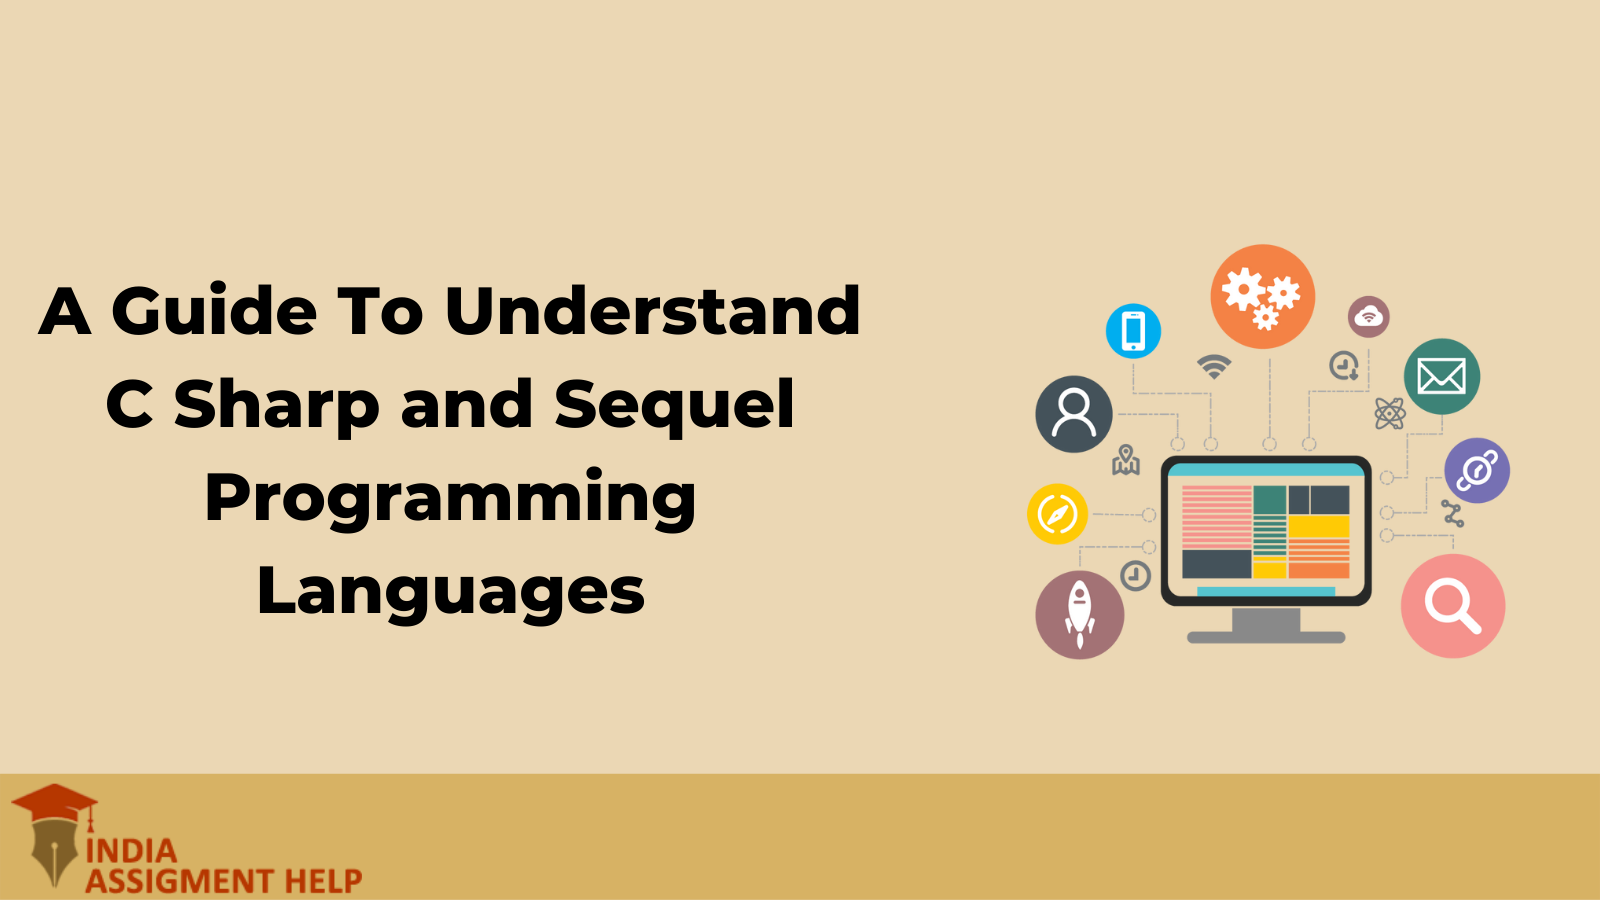 A Guide To Understand C Sharp and Sequel Programming Languages